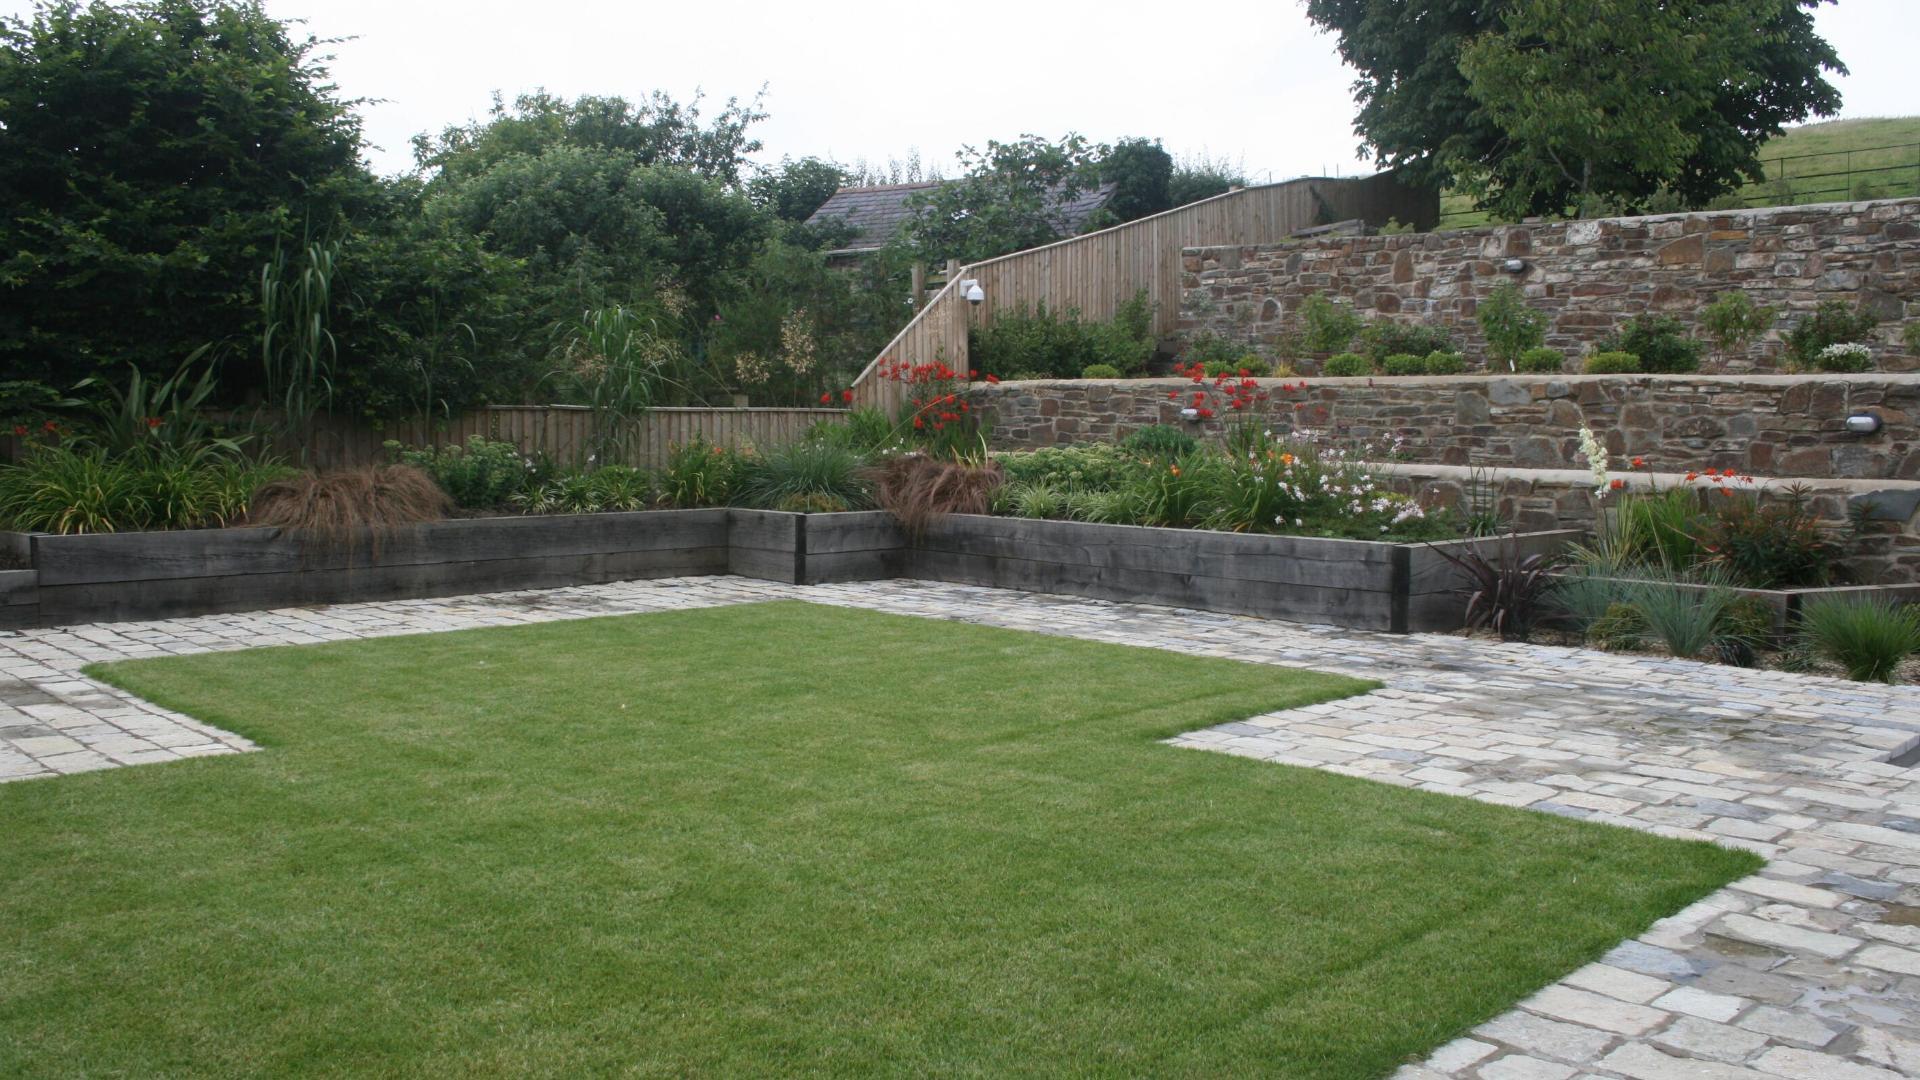 Alison Bockh Garden Design and Landscaping - North Devon - One year on and planting looking good